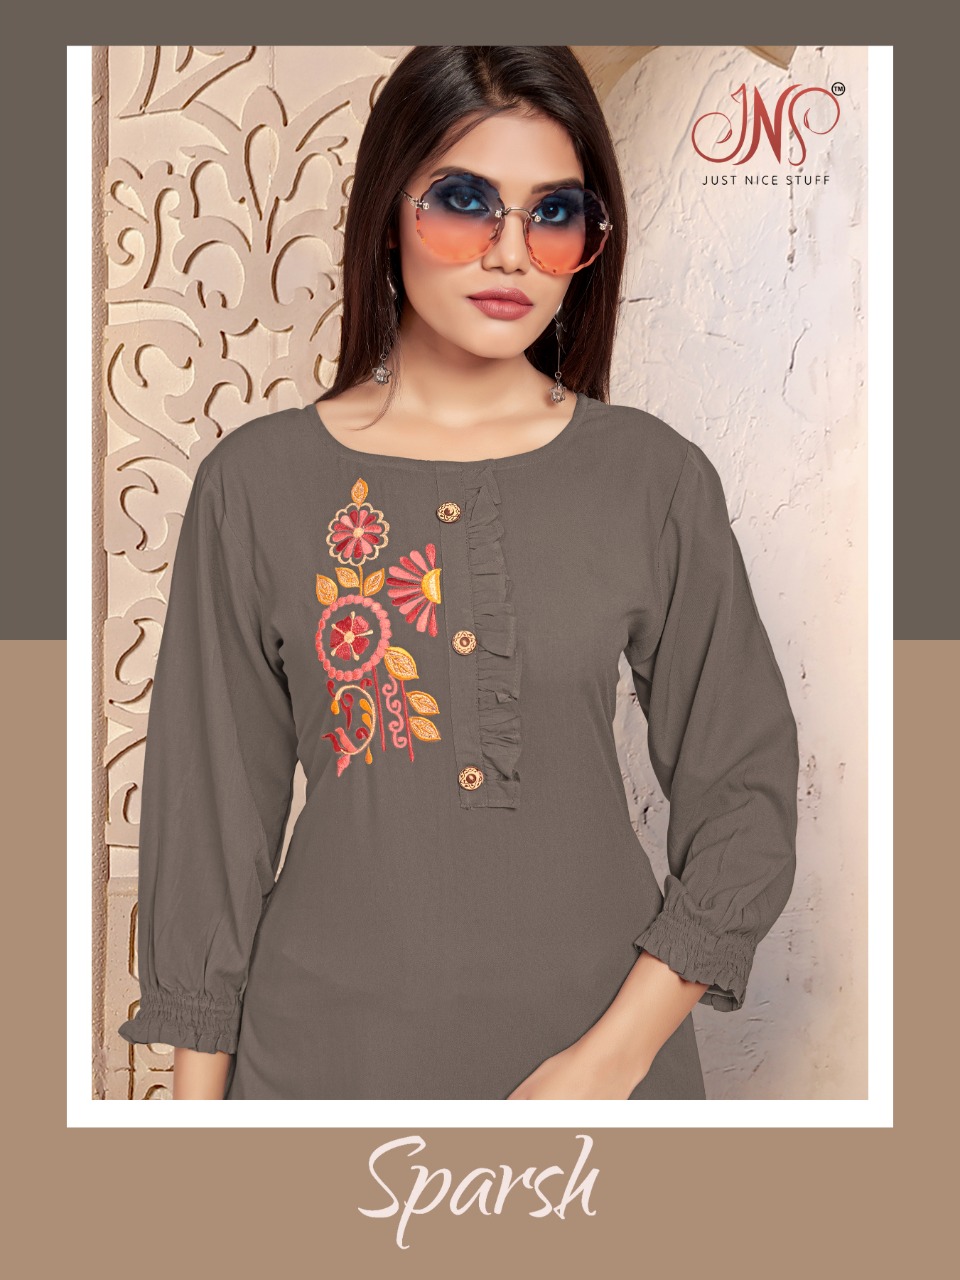 Jns Sparsh Rayon With Work Readymade Short Kurti Tops At Who...